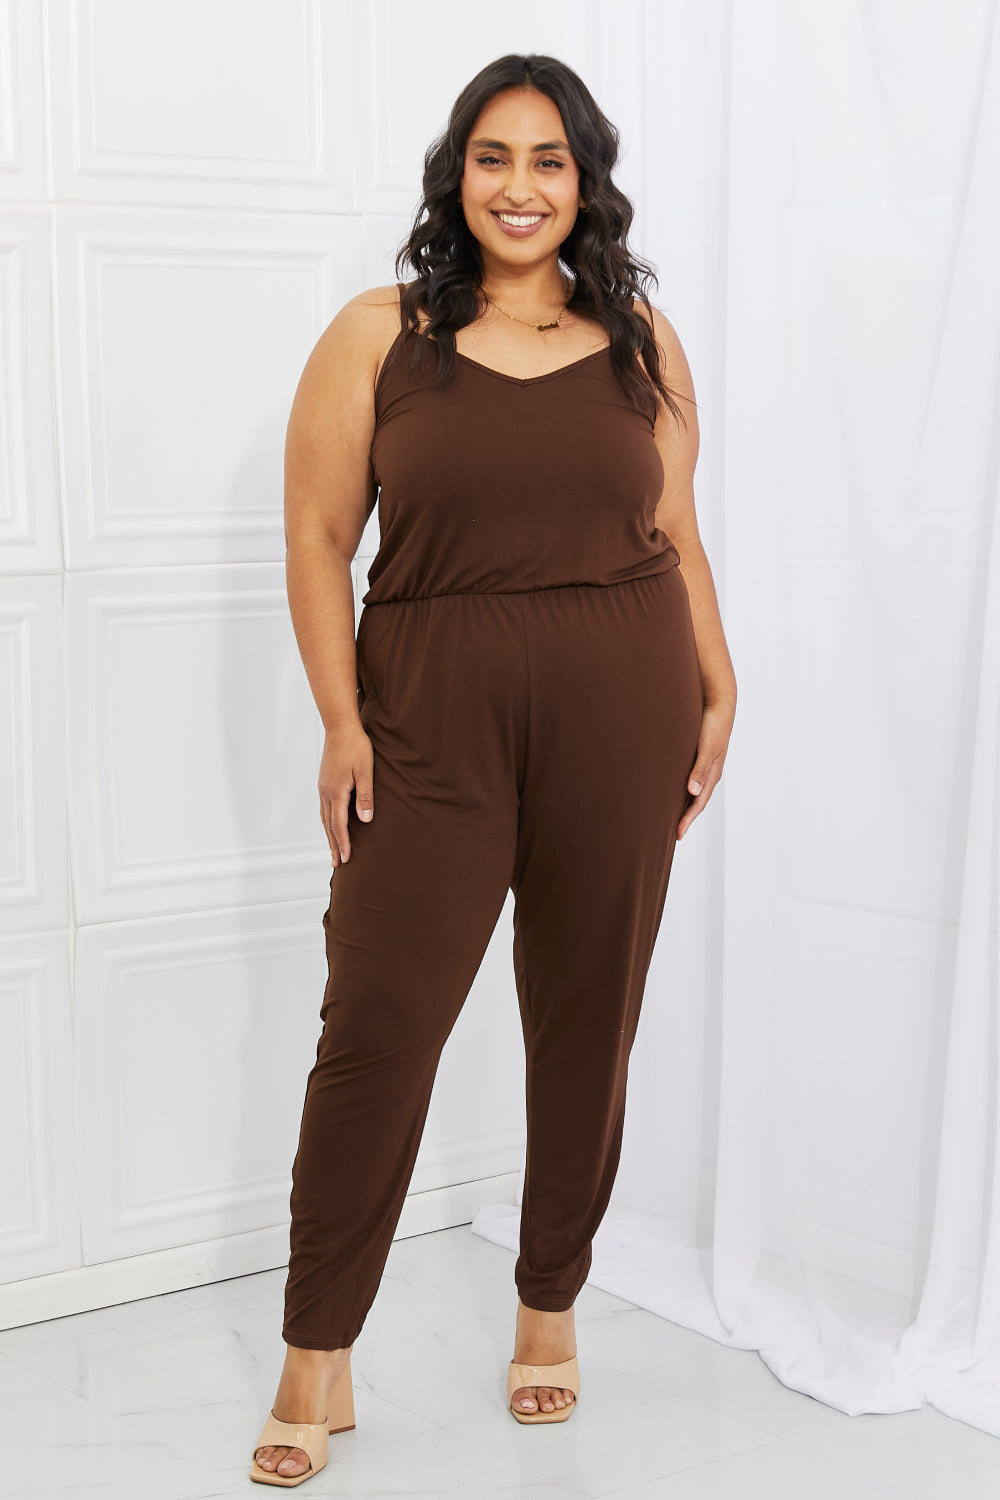 Comfy Casual Full Size Solid Elastic Waistband Jumpsuit in Chocolate - Women’s Clothing & Accessories - Jumpsuits &